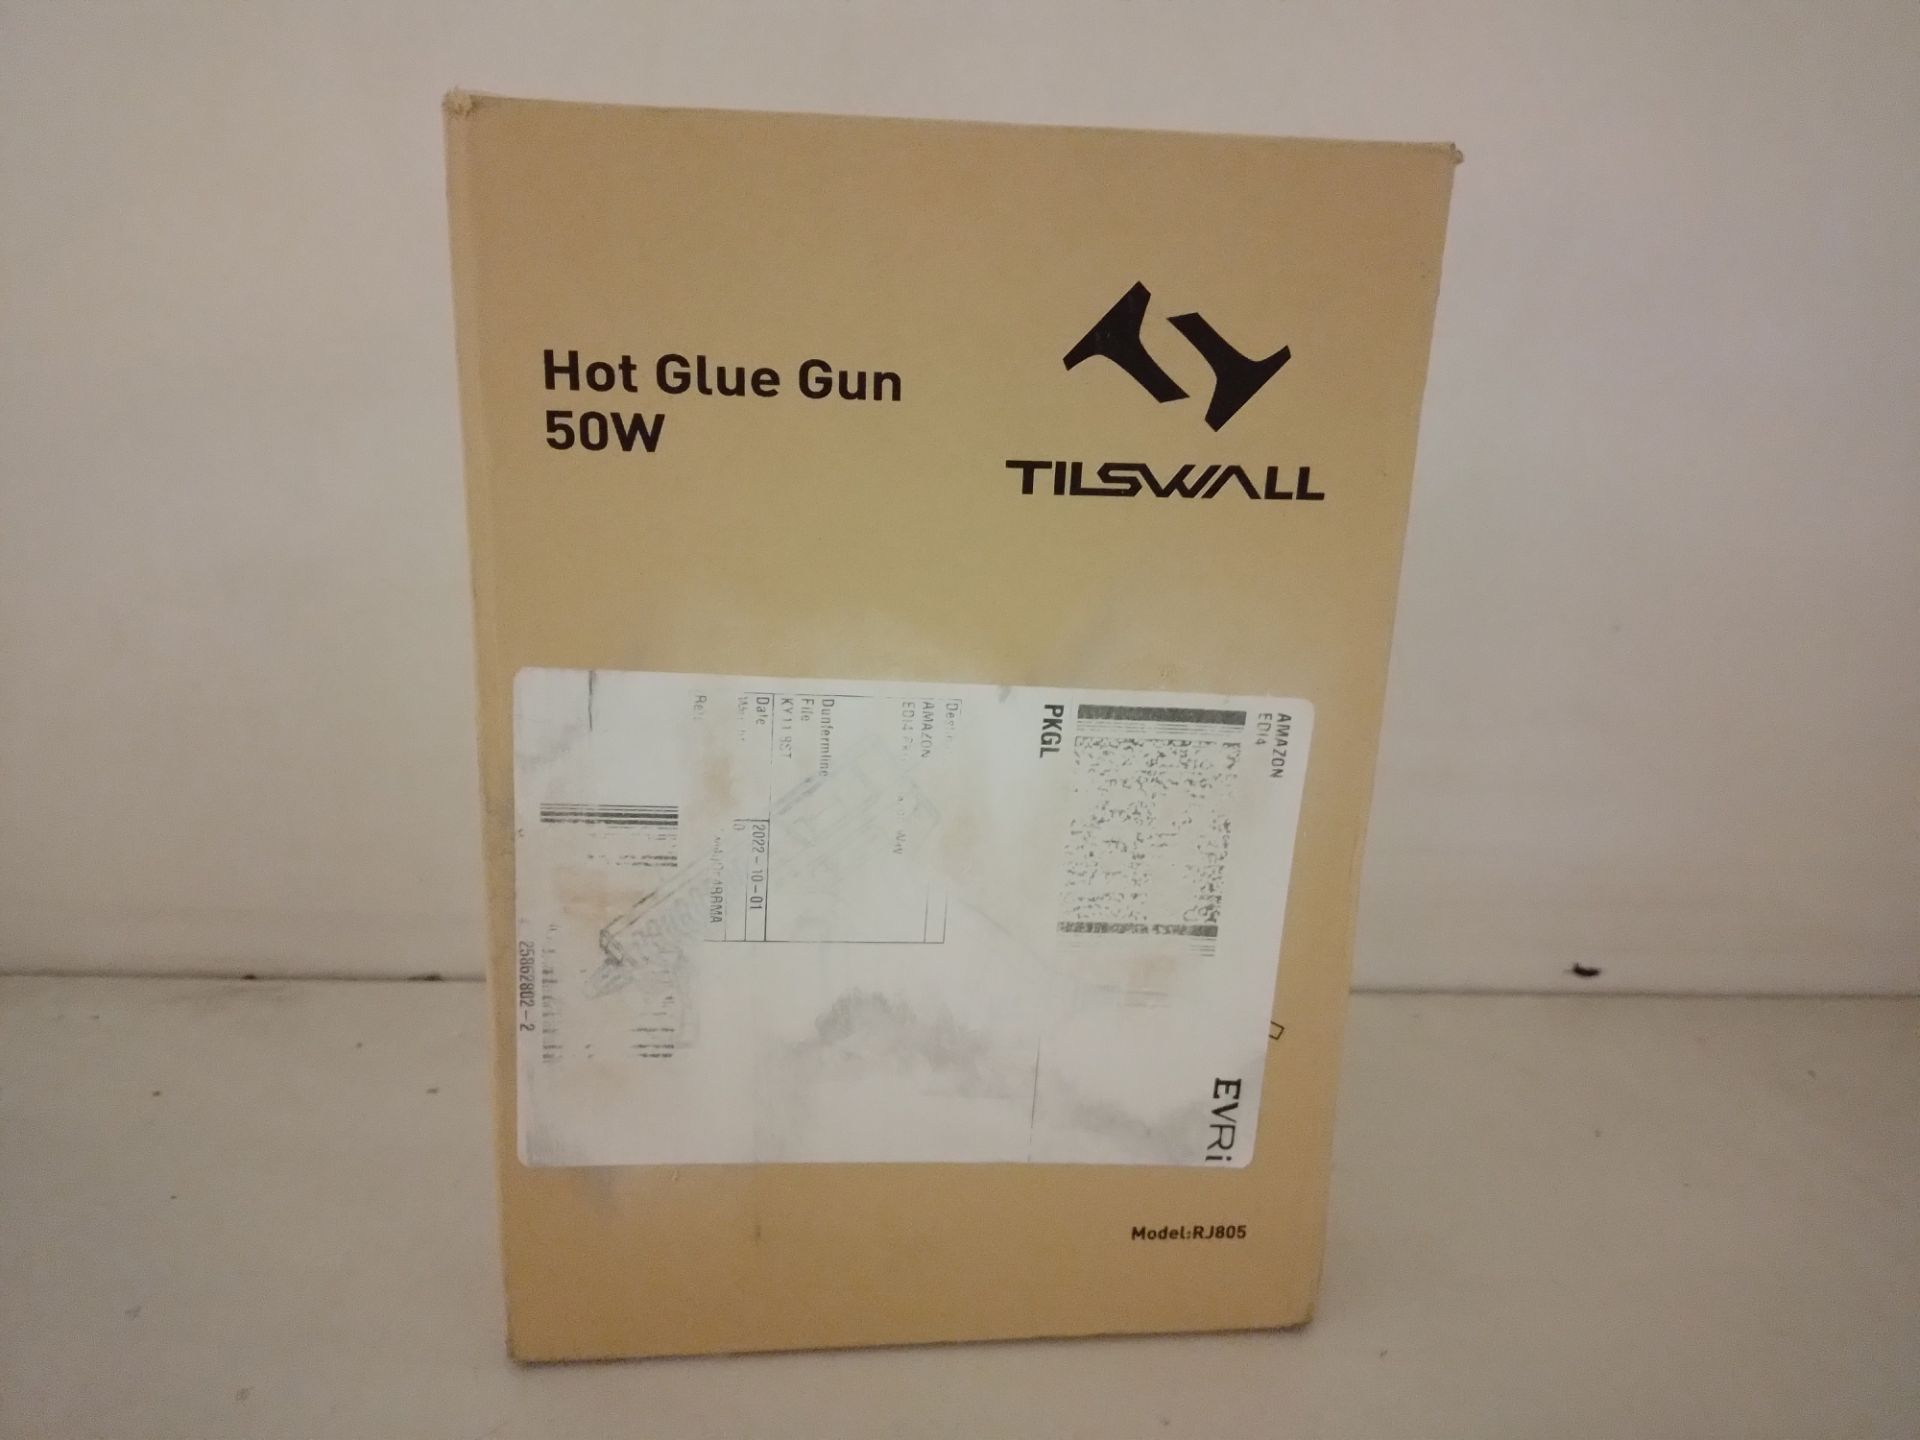 RRP £13.99 Tilswall Hot Glue Gun for Crafting - Image 2 of 2